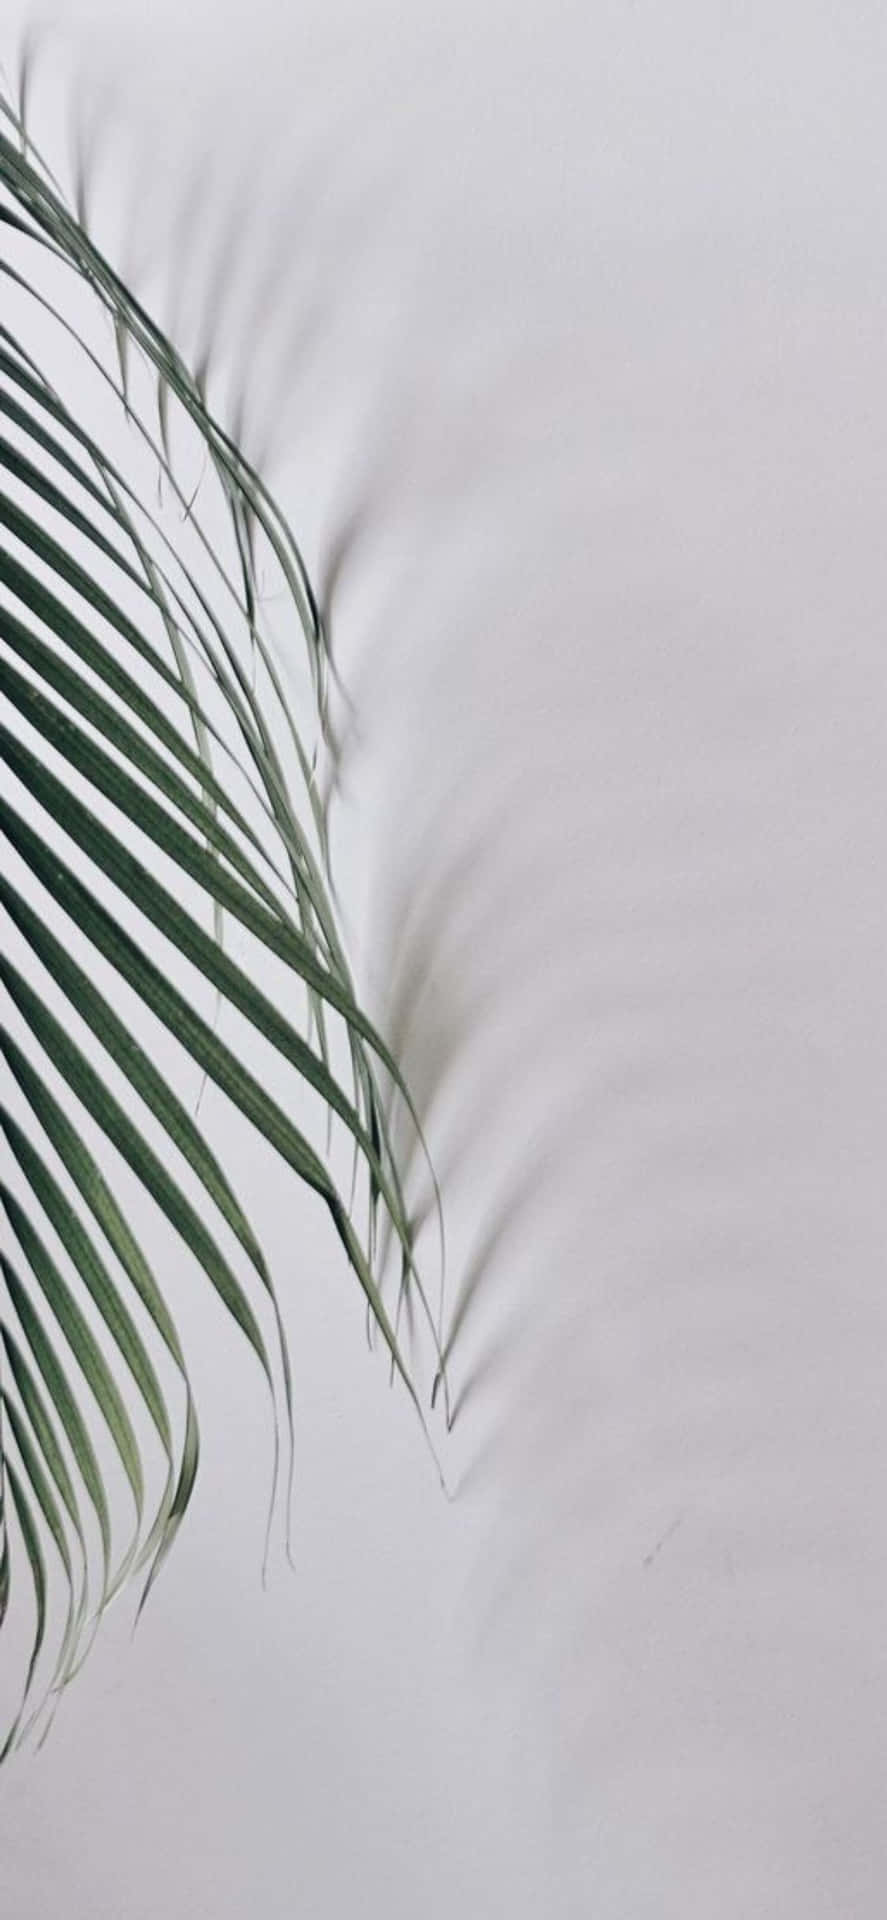 Iphone X Minimal Palm Leaves Background